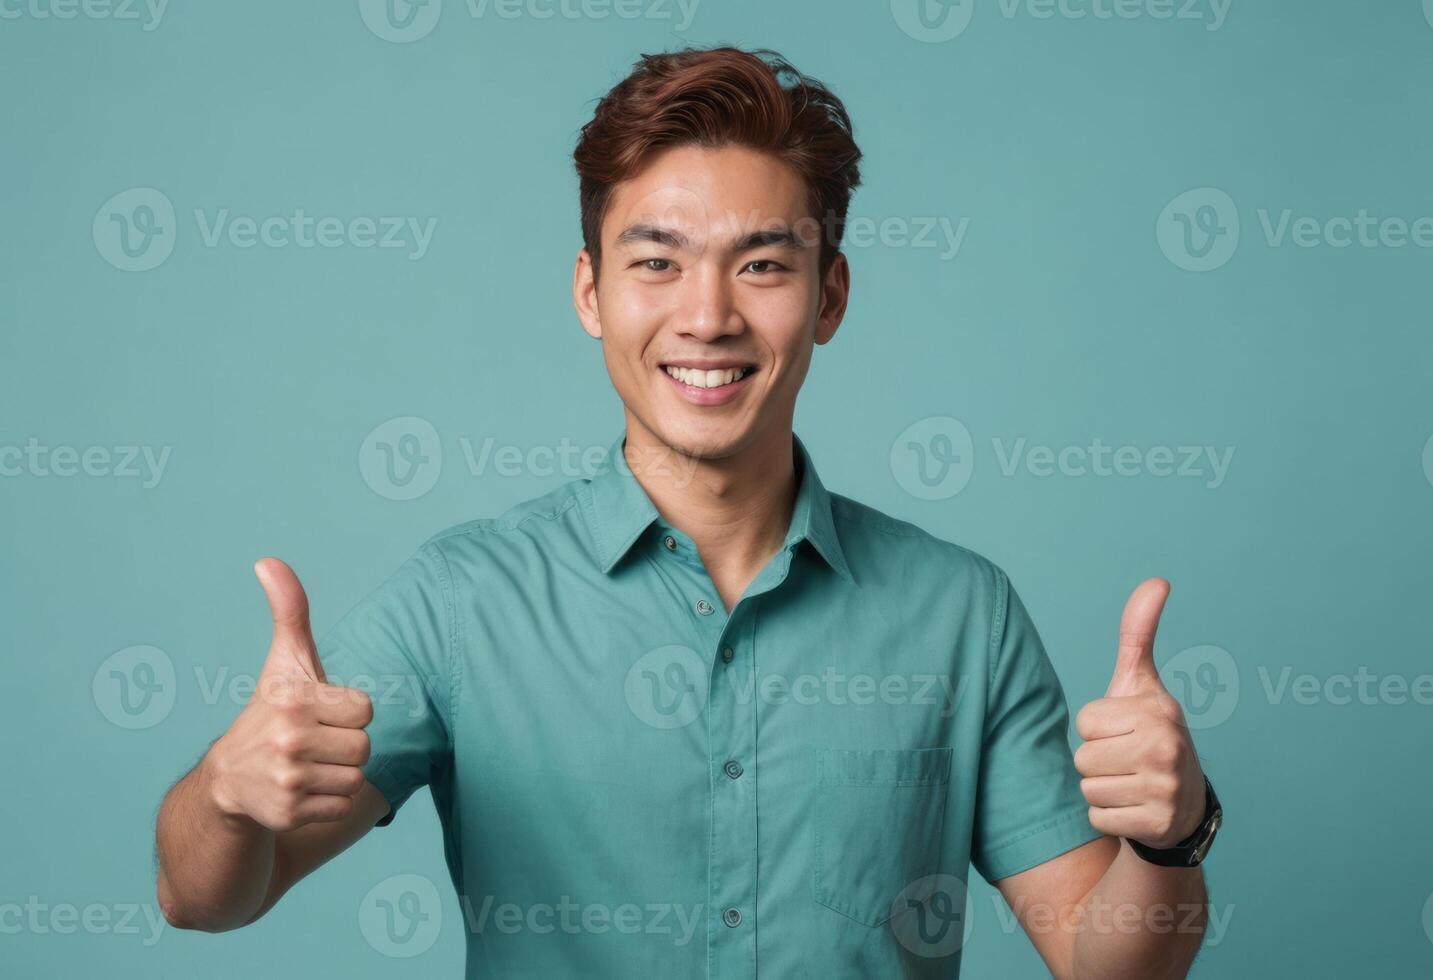 AI Generated A man in a bright teal shirt gives double thumbs up with a broad smile. His energetic expression and casual style convey a positive message. photo